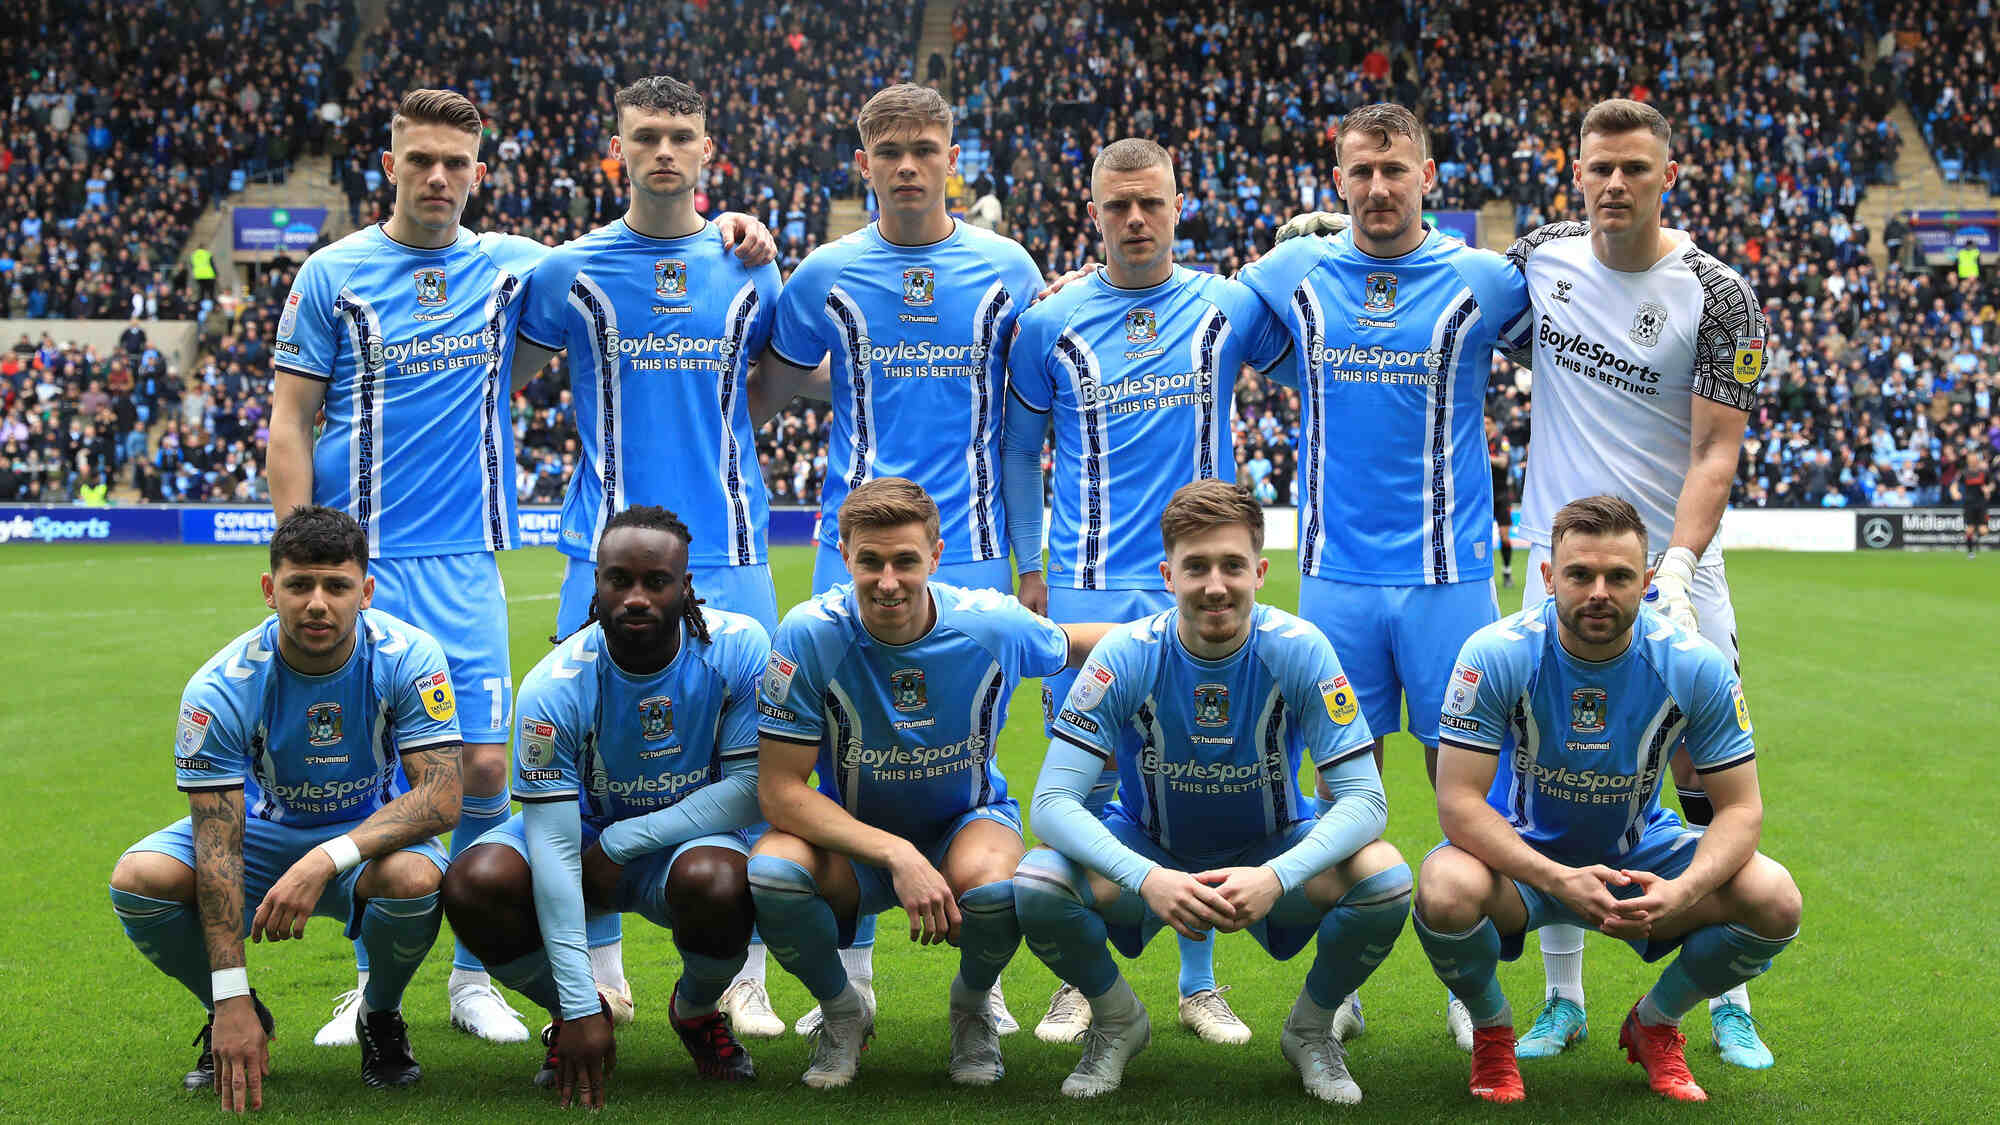 Coventry City FC: 10 Football Club Facts - Facts.net